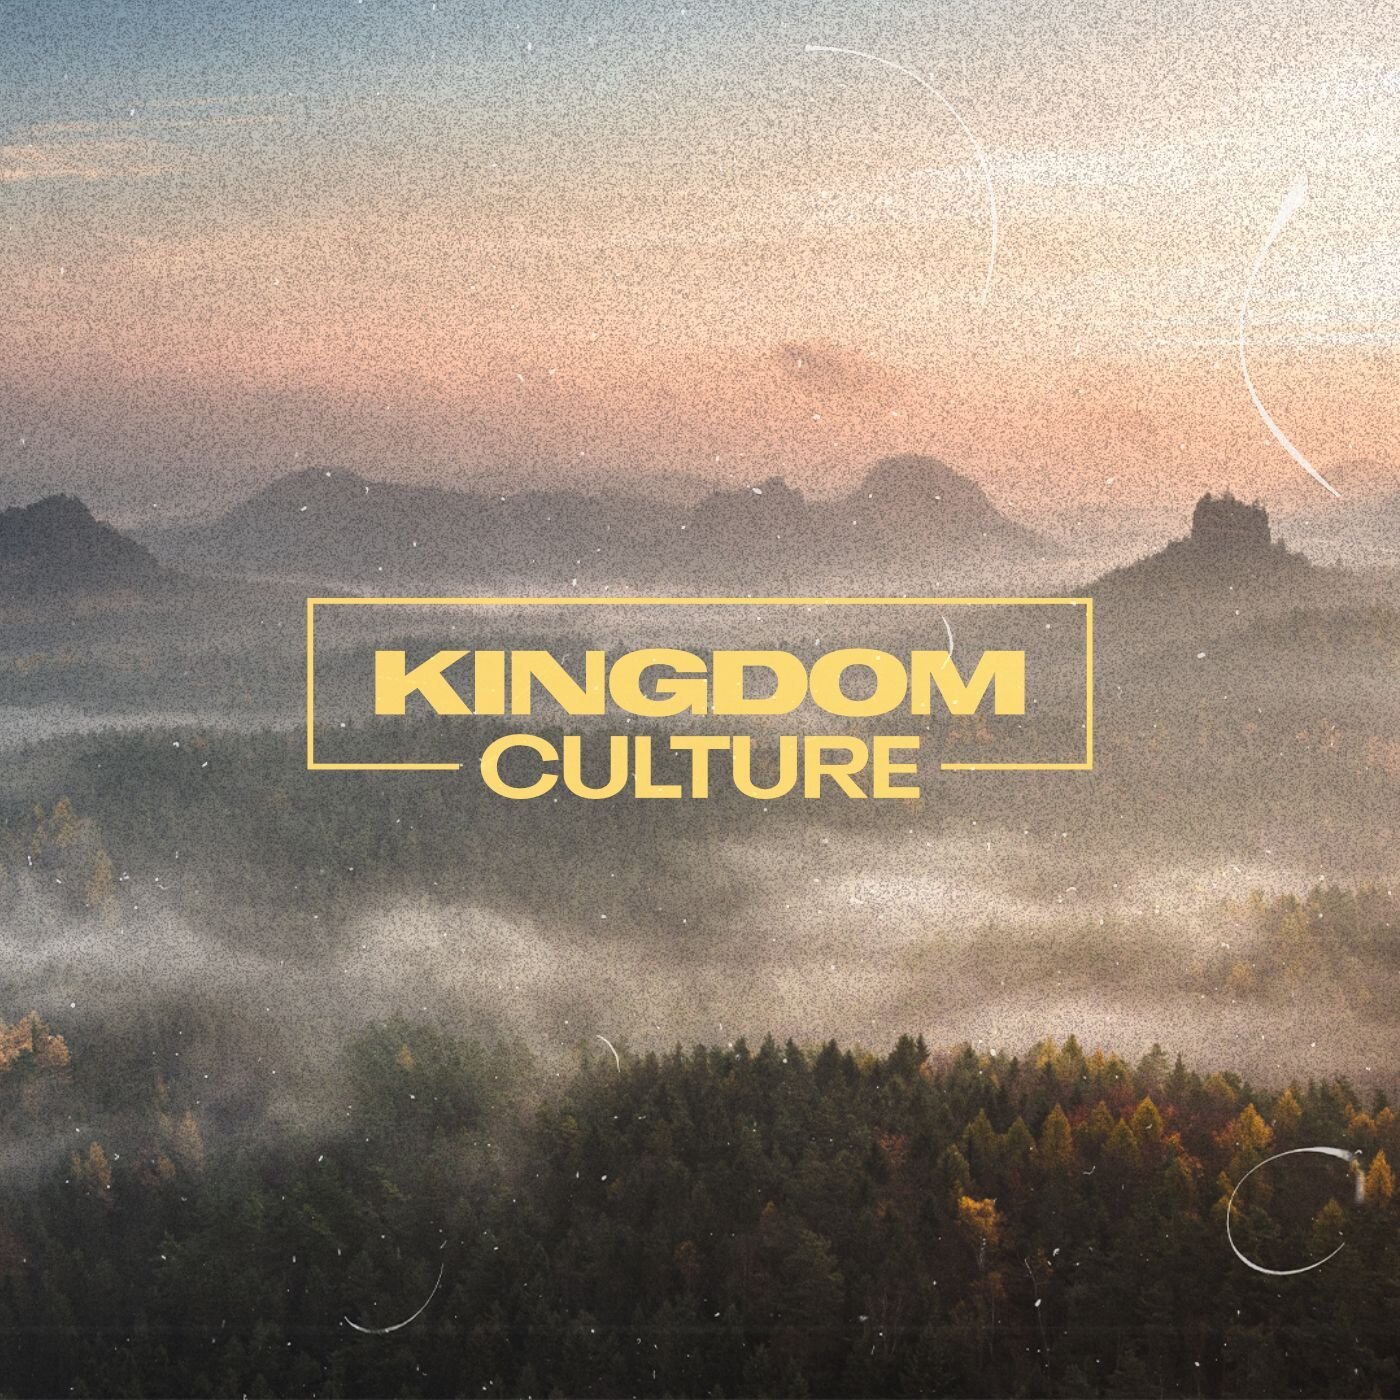 Come and join us as we gather this Sunday at 10am both in-person and online! Keith is continuing our series on 'Kingdom Culture' as we come together to worship this week. We'd love to see you there!

Join online 👉 link in our bio!